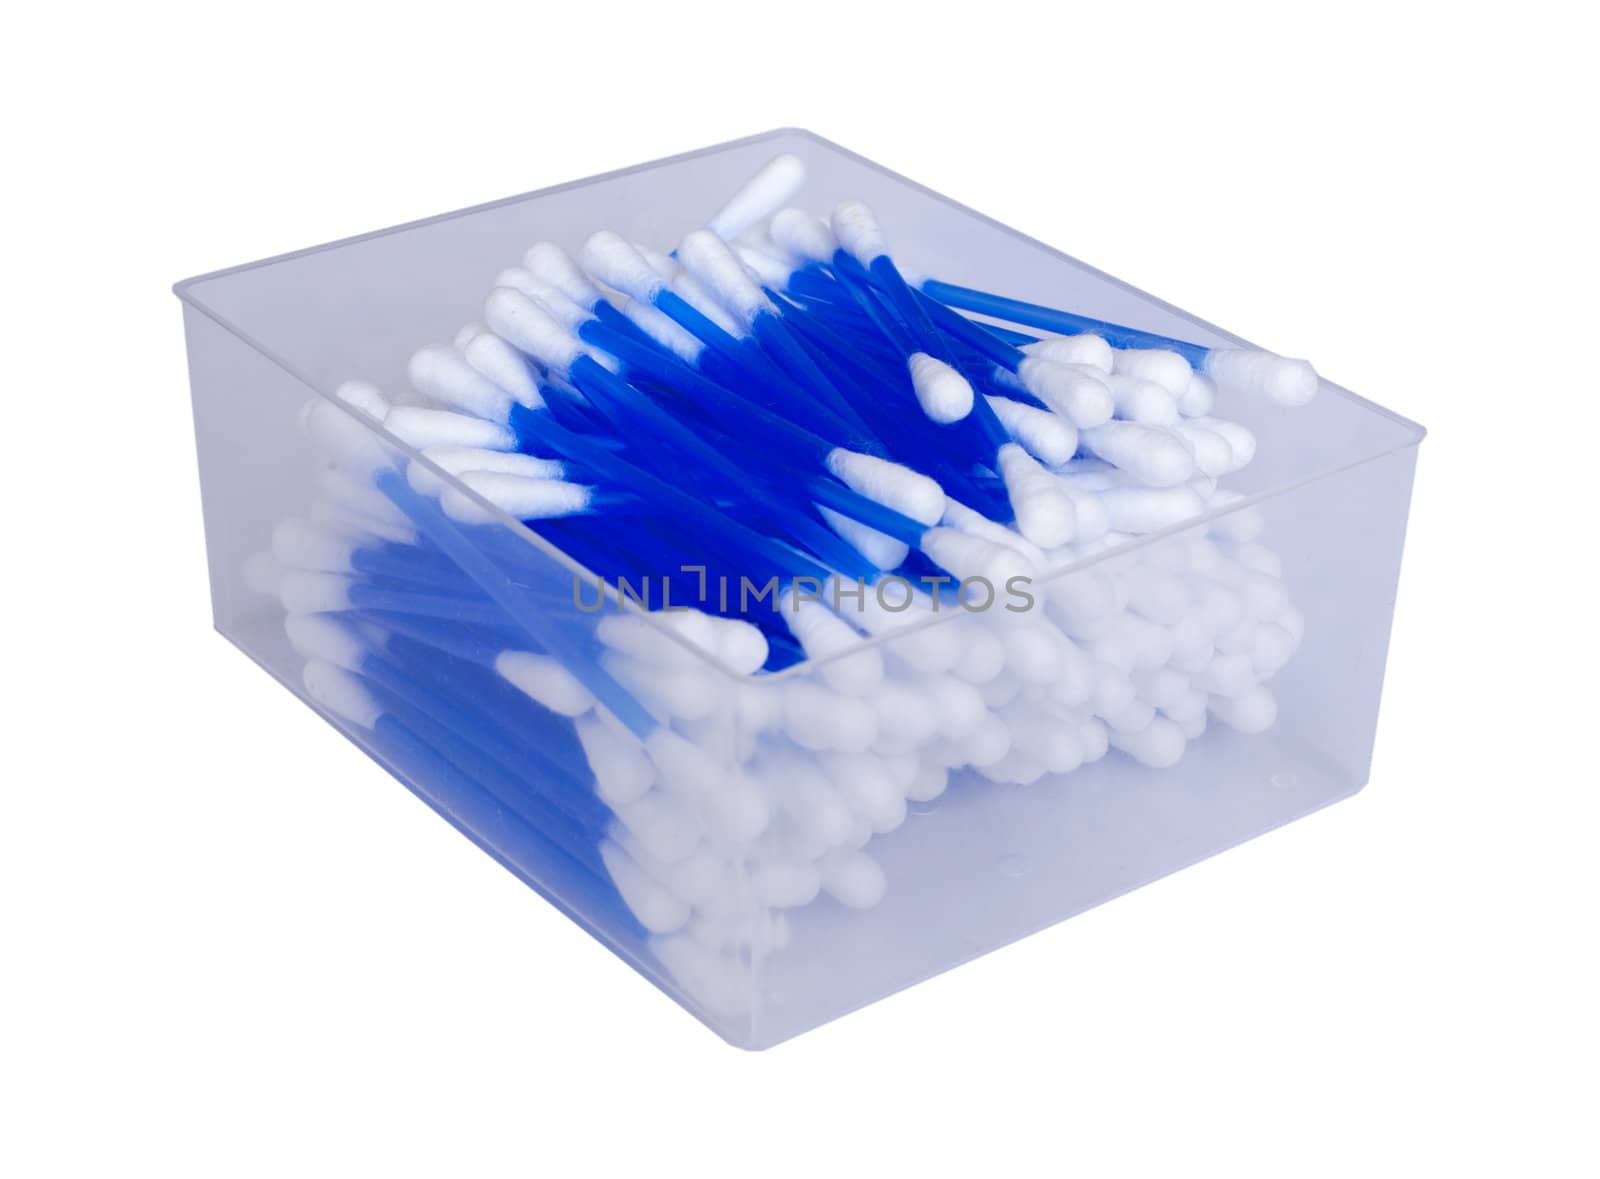 A cotton ear sticks in plastic box isolated on white
